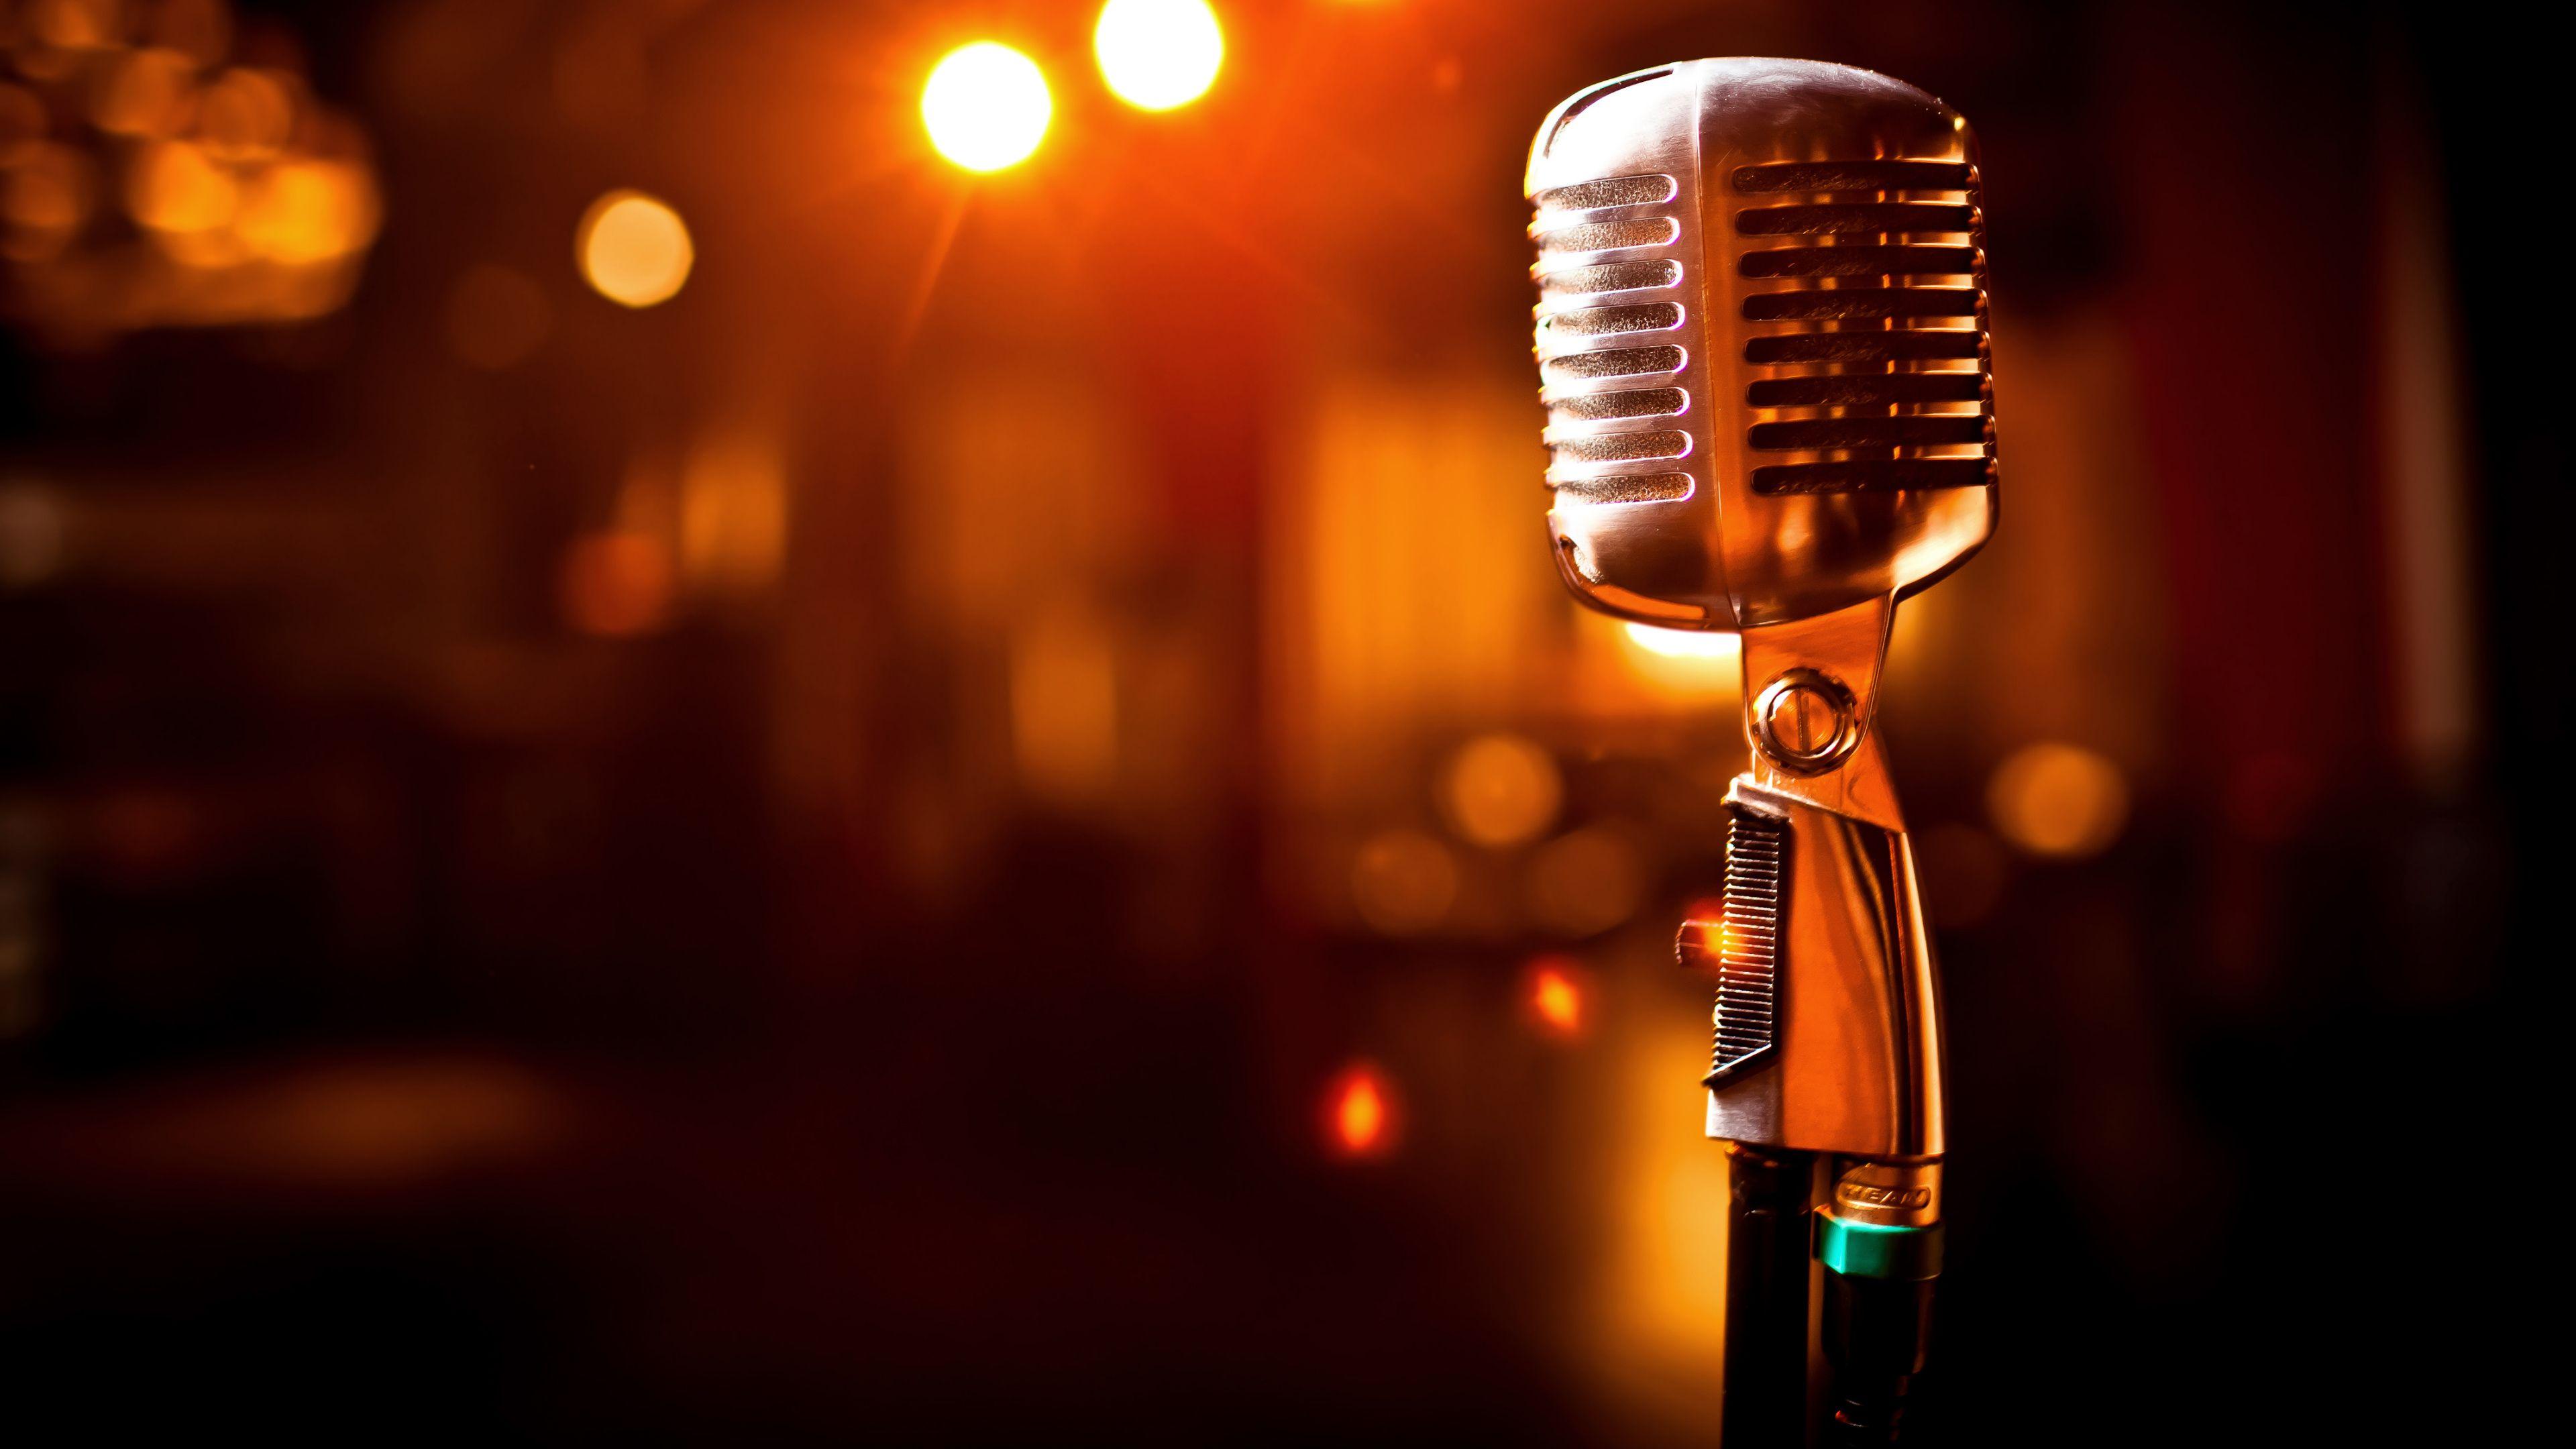 2400 Open Mic Stock Photos Pictures  RoyaltyFree Images  iStock   Microphone Open mic night Poetry slam